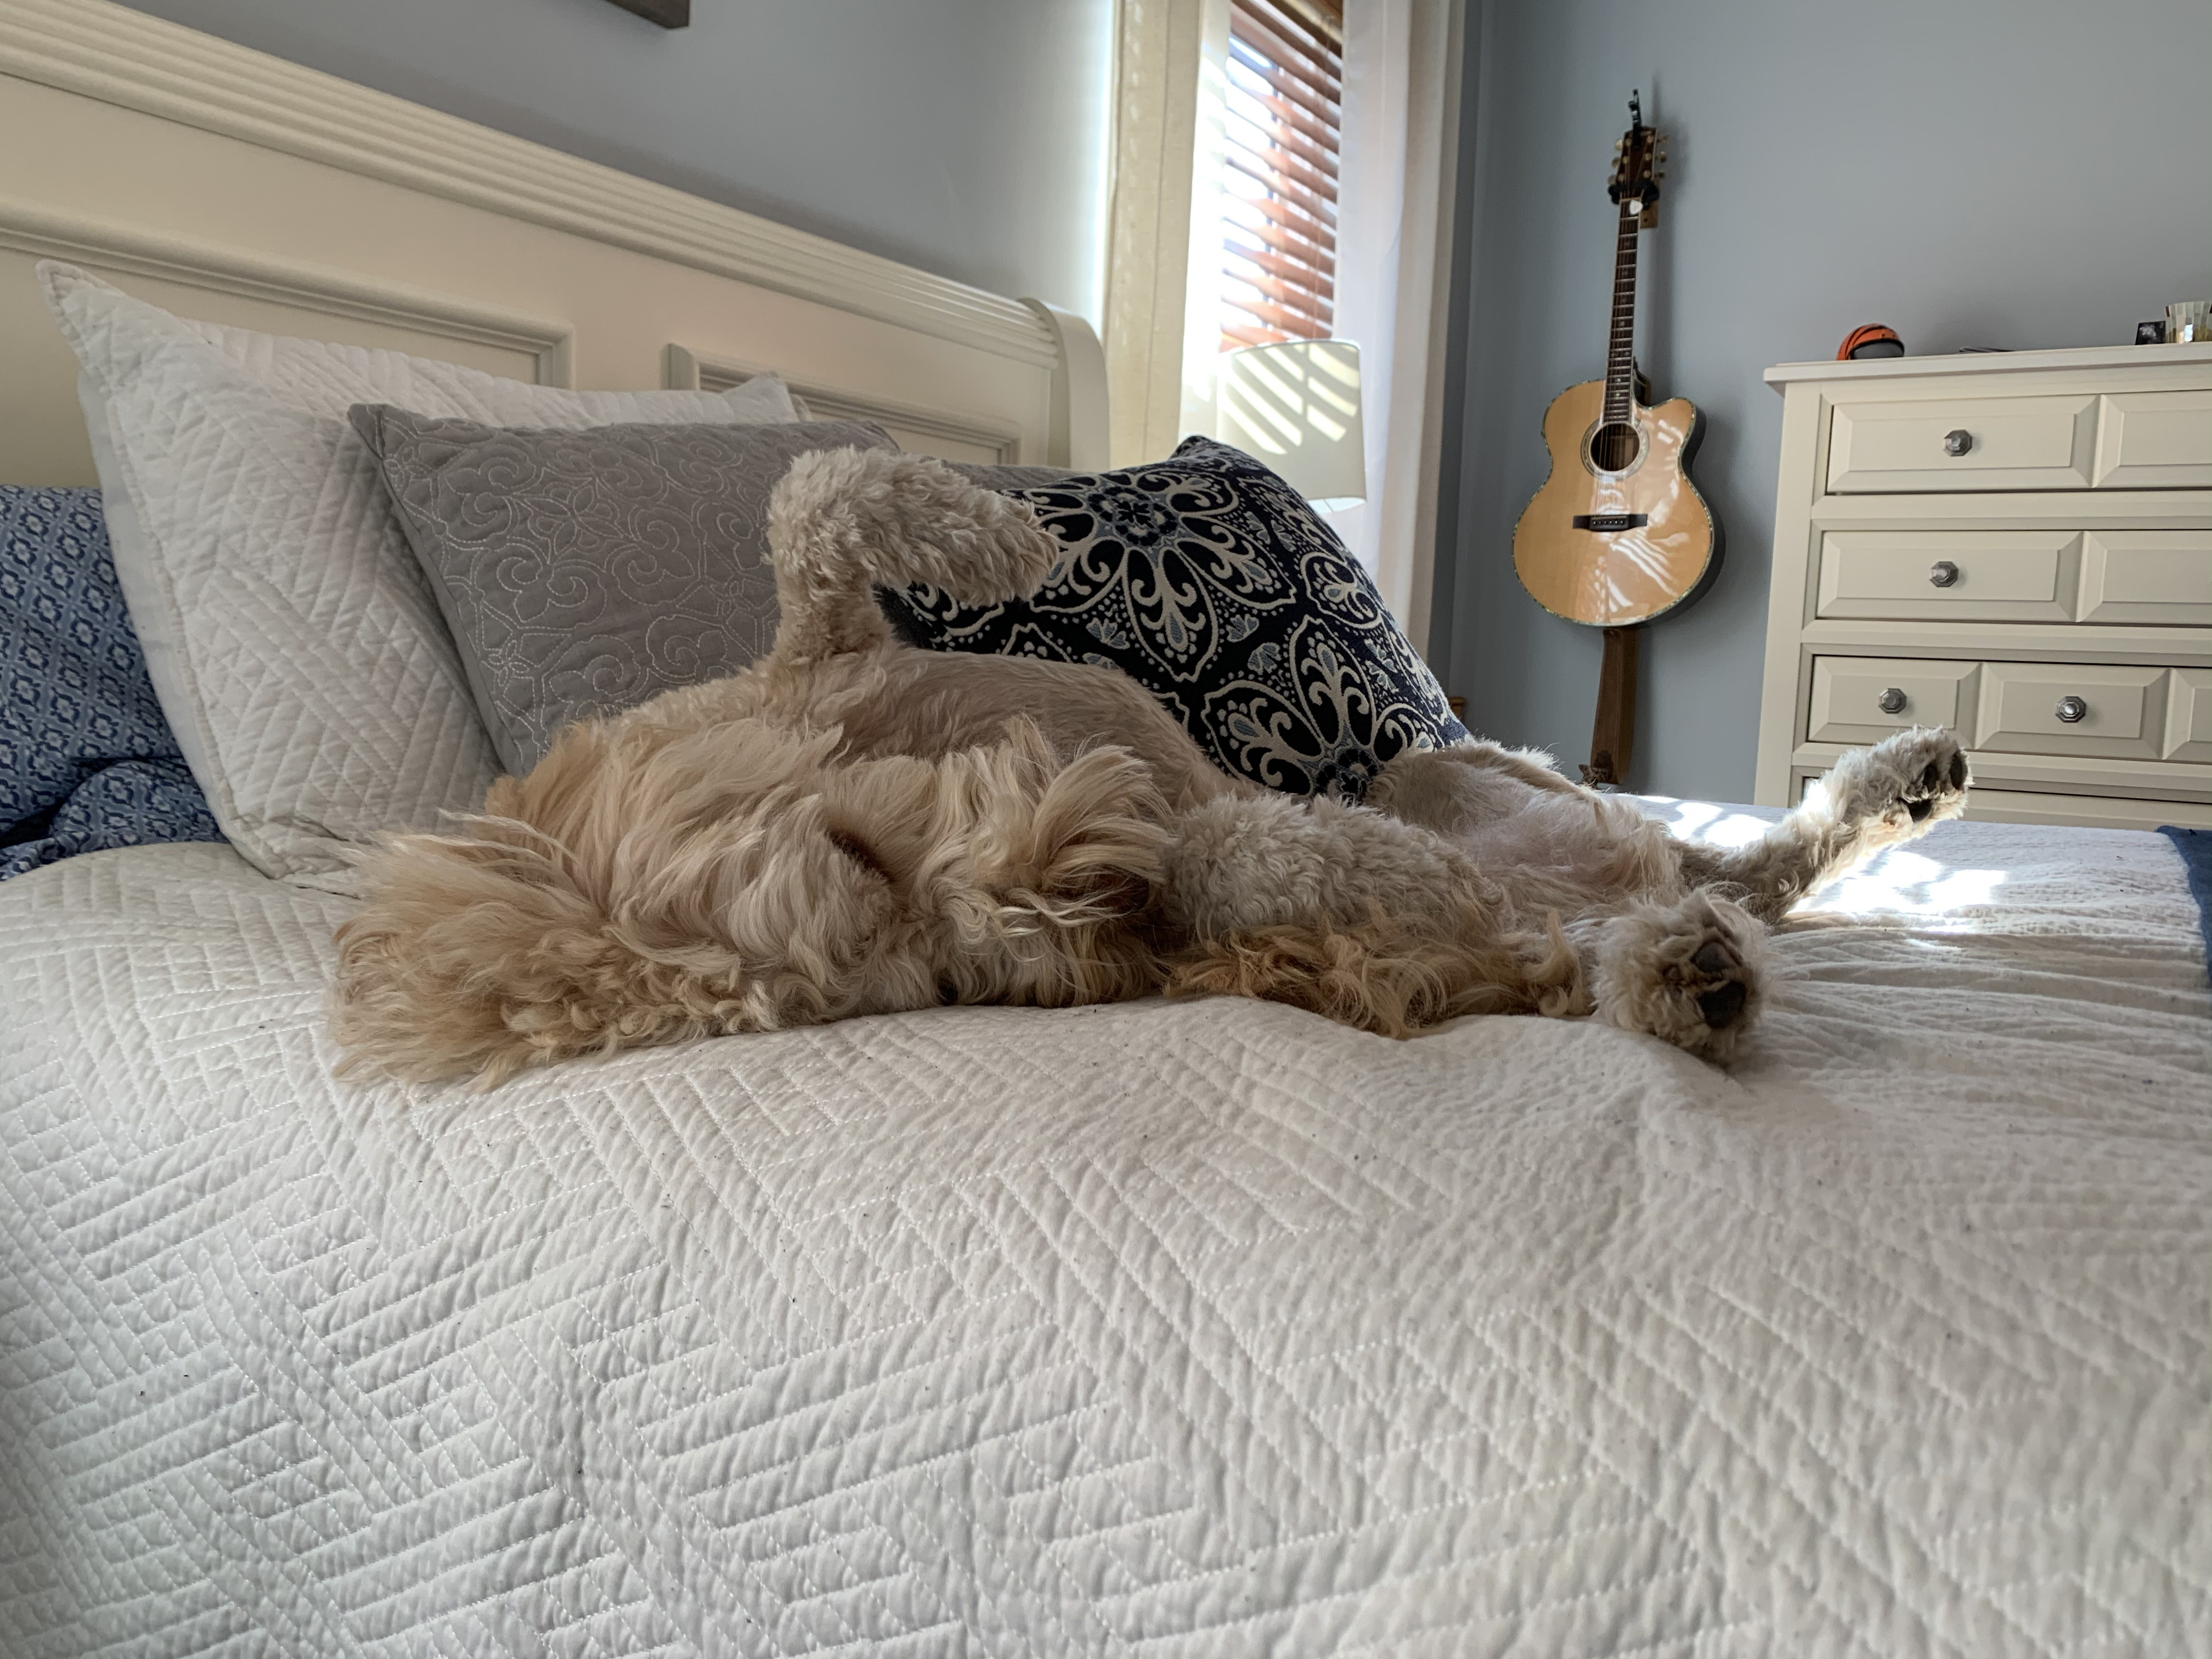 Goldendoodle snoozing